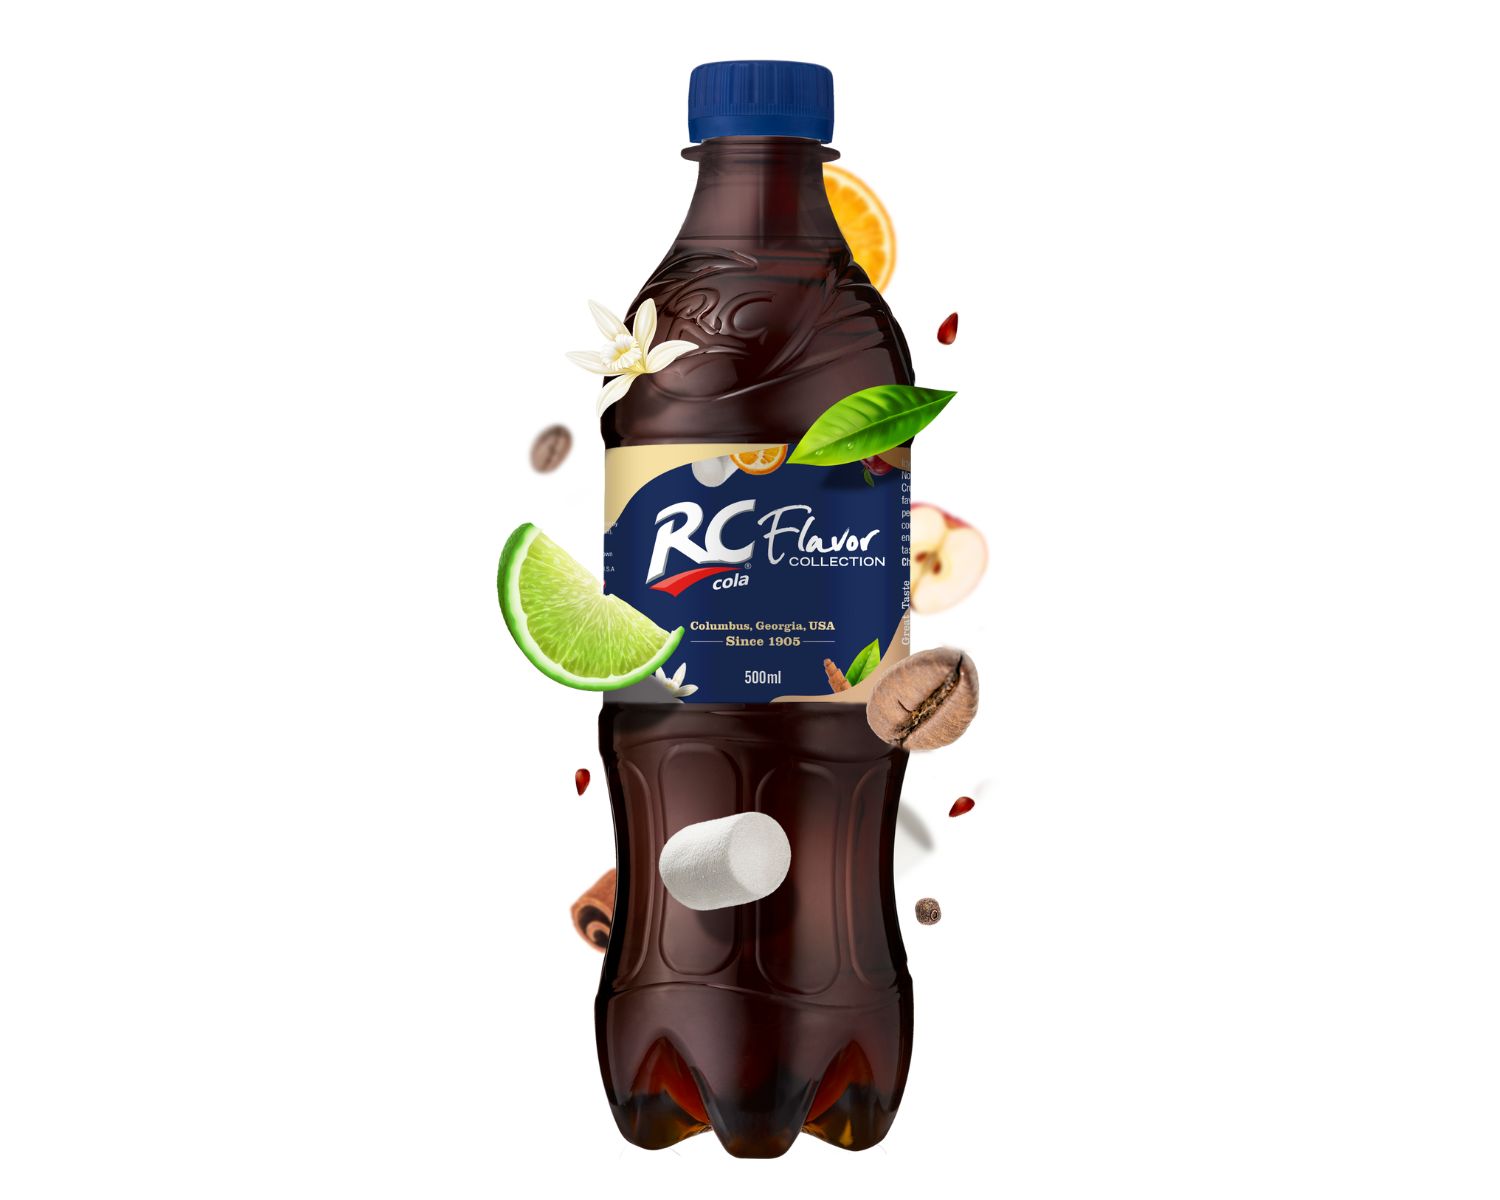 18-rc-cola-nutrition-facts